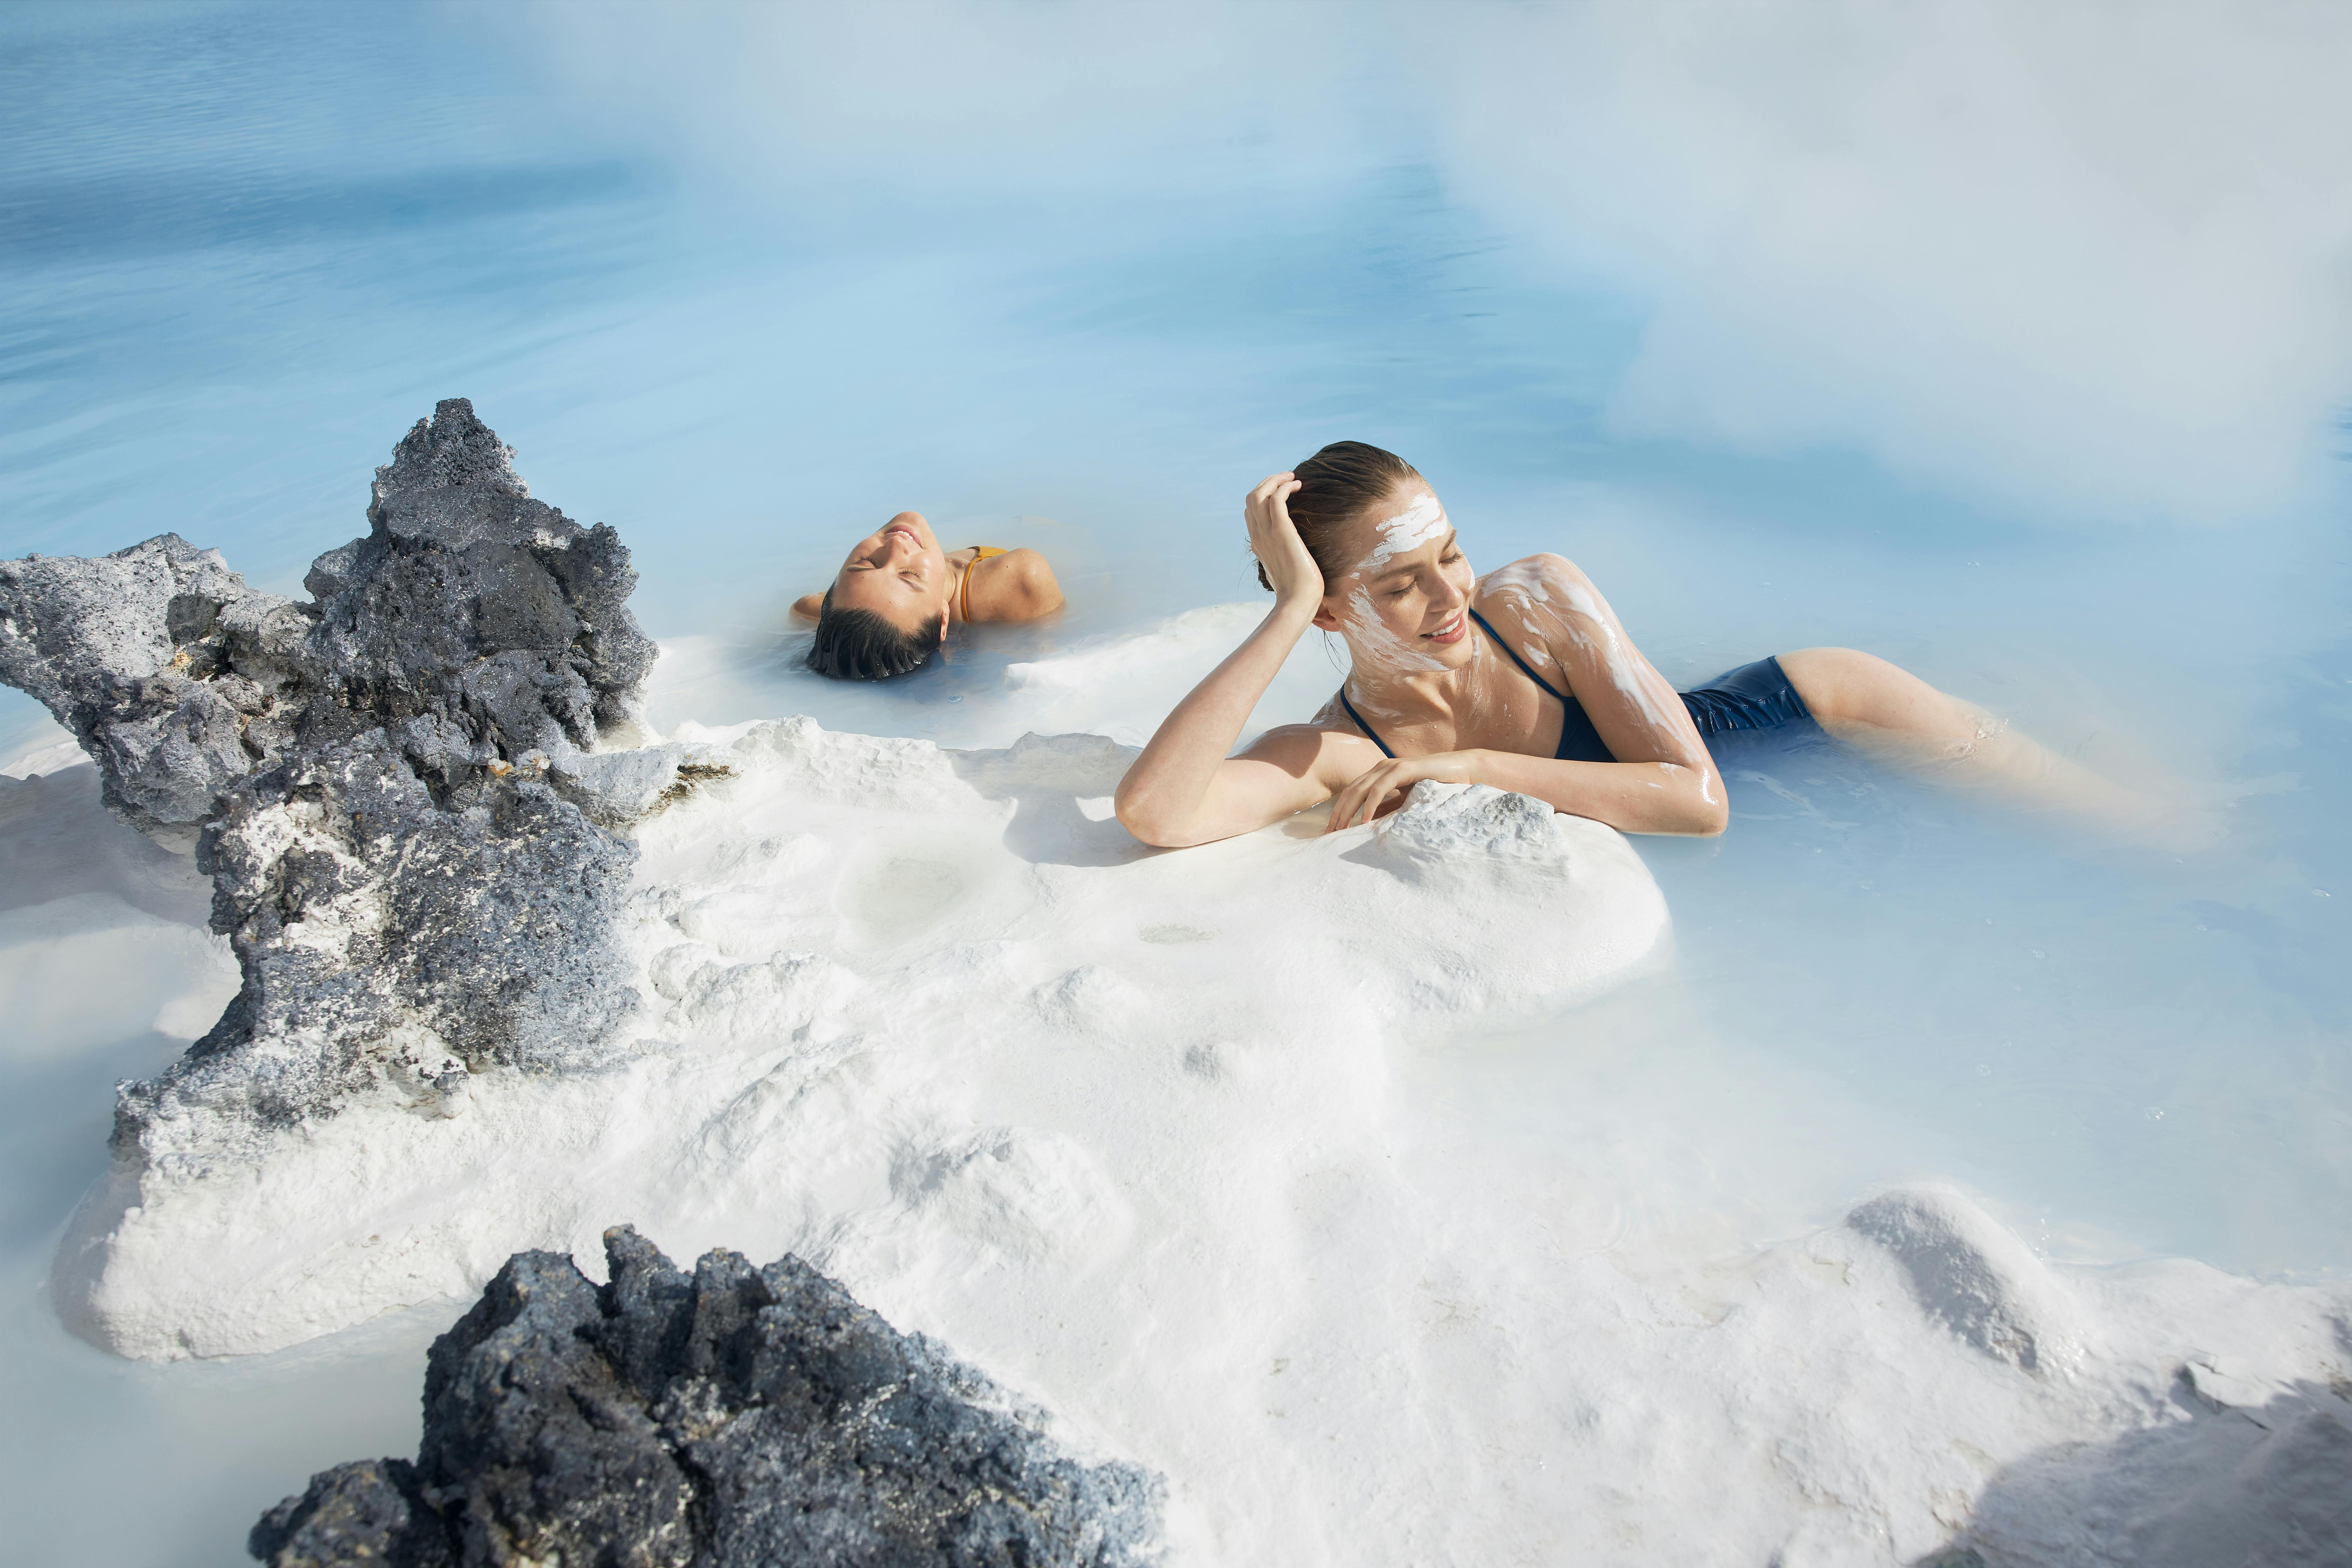 Blue Lagoon's mineral-rich waters